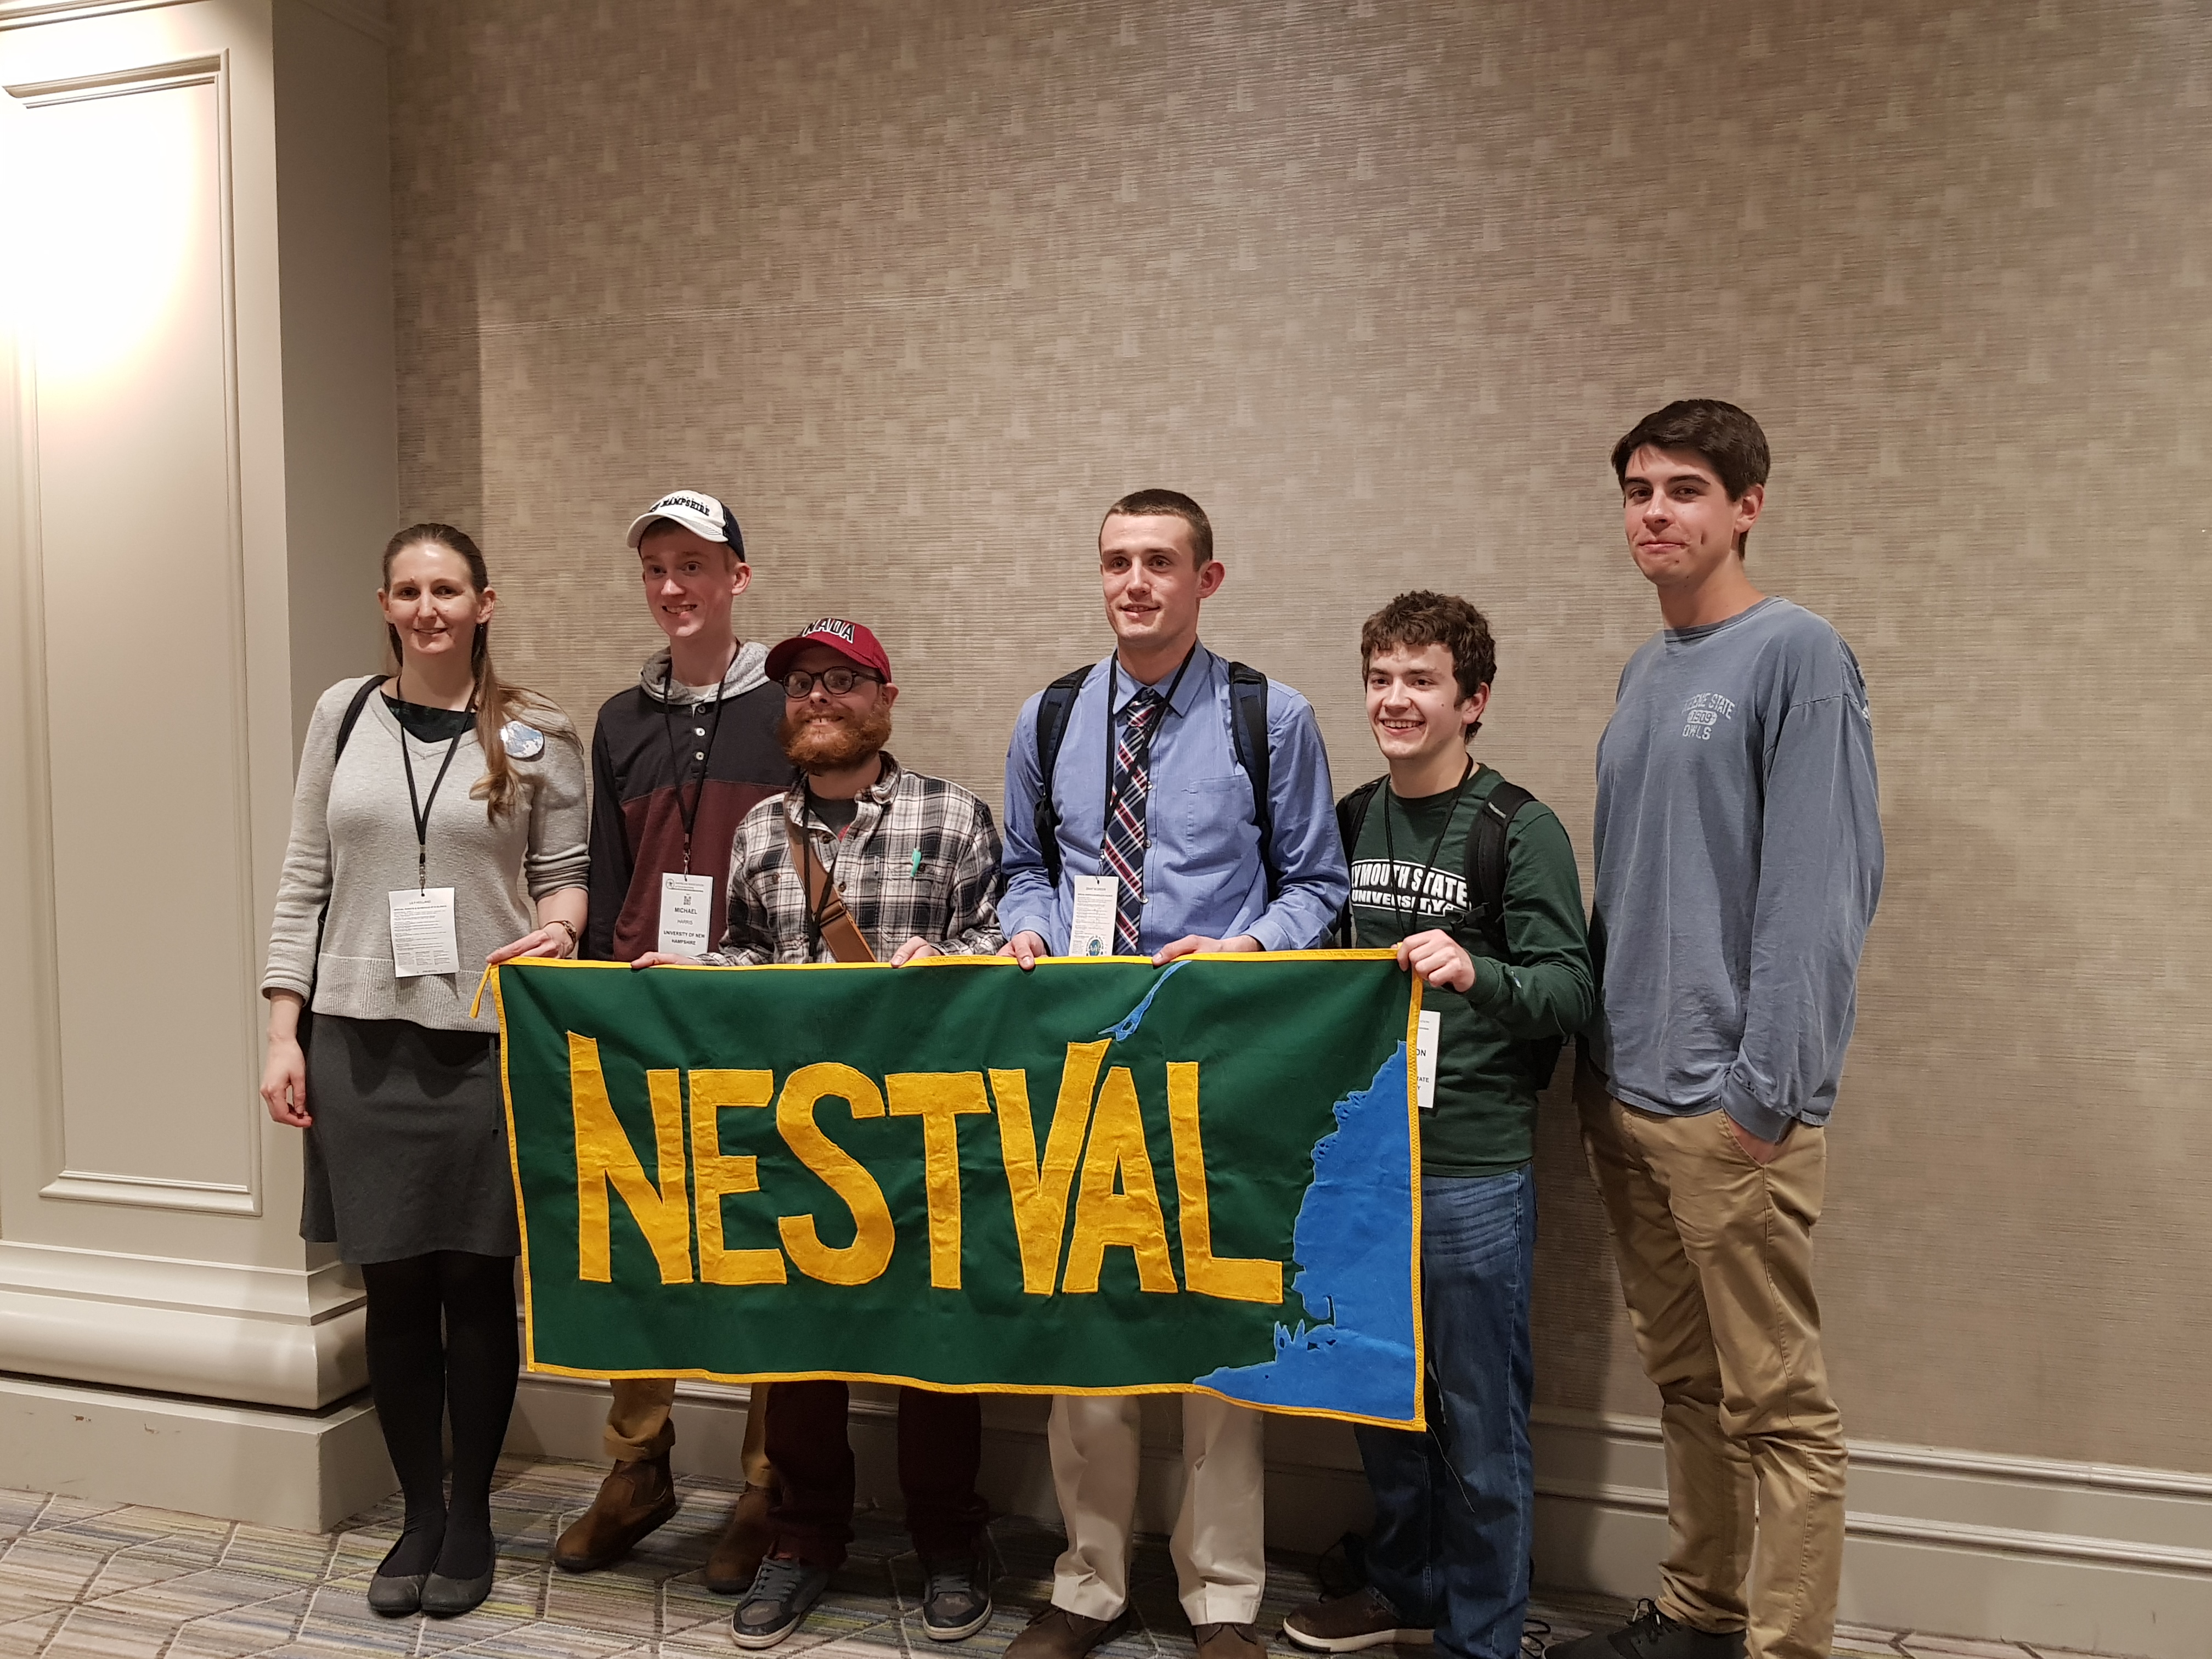 Lily Holland, UMass Geography major (pictured at left) with the New England-St Lawrence Valley Region World Geography Bowl team at the 2019 national championship in Washington, DC